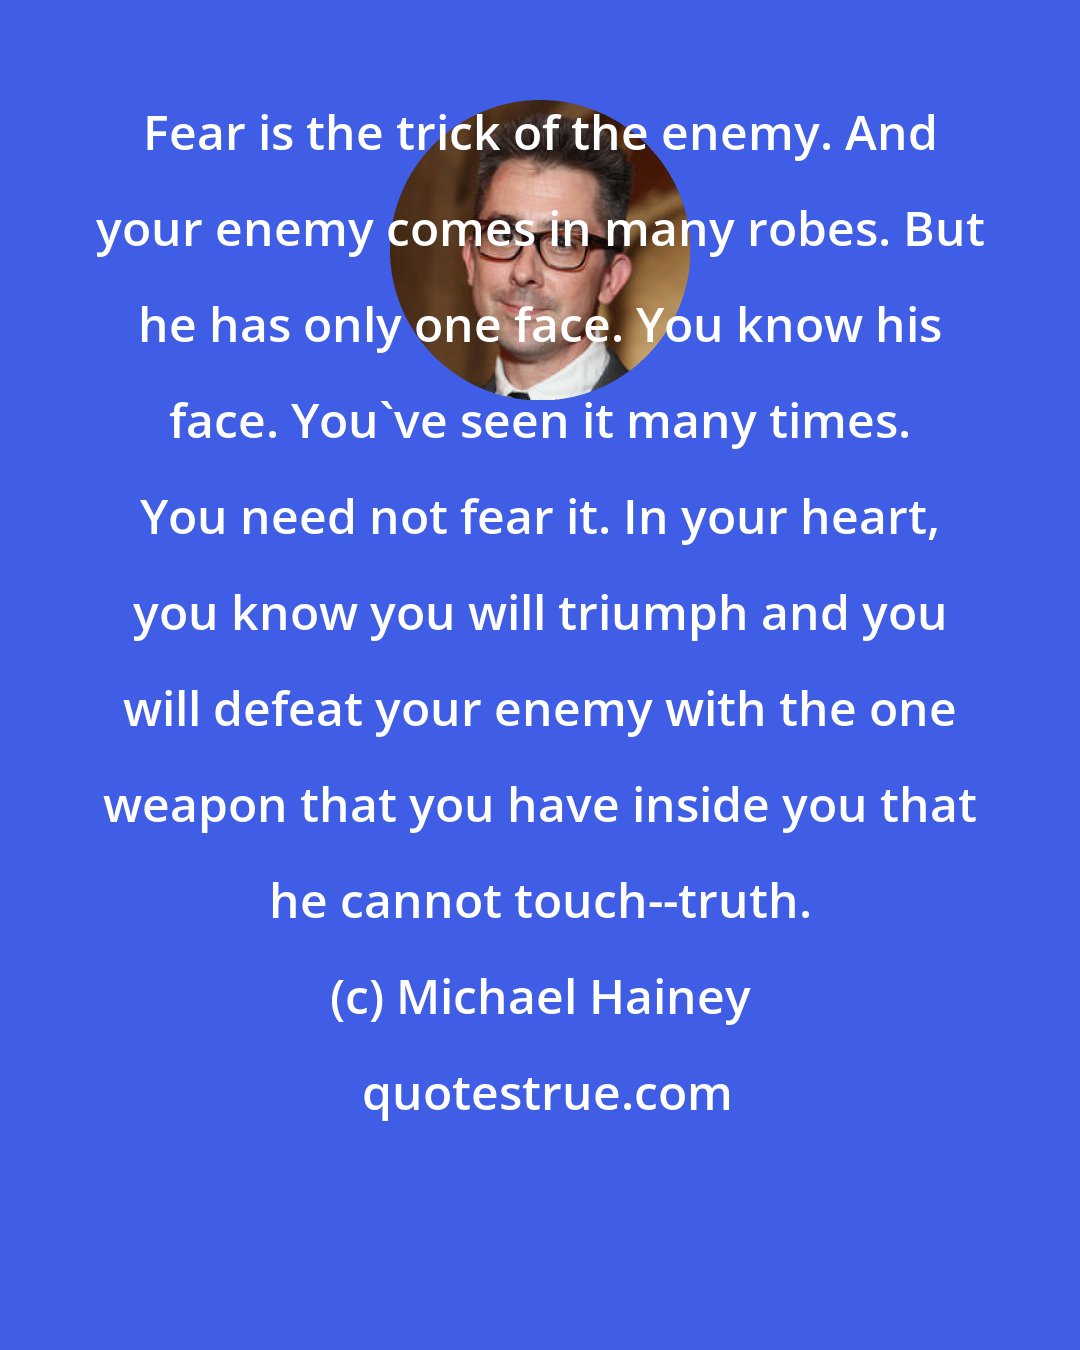 Michael Hainey: Fear is the trick of the enemy. And your enemy comes in many robes. But he has only one face. You know his face. You've seen it many times. You need not fear it. In your heart, you know you will triumph and you will defeat your enemy with the one weapon that you have inside you that he cannot touch--truth.